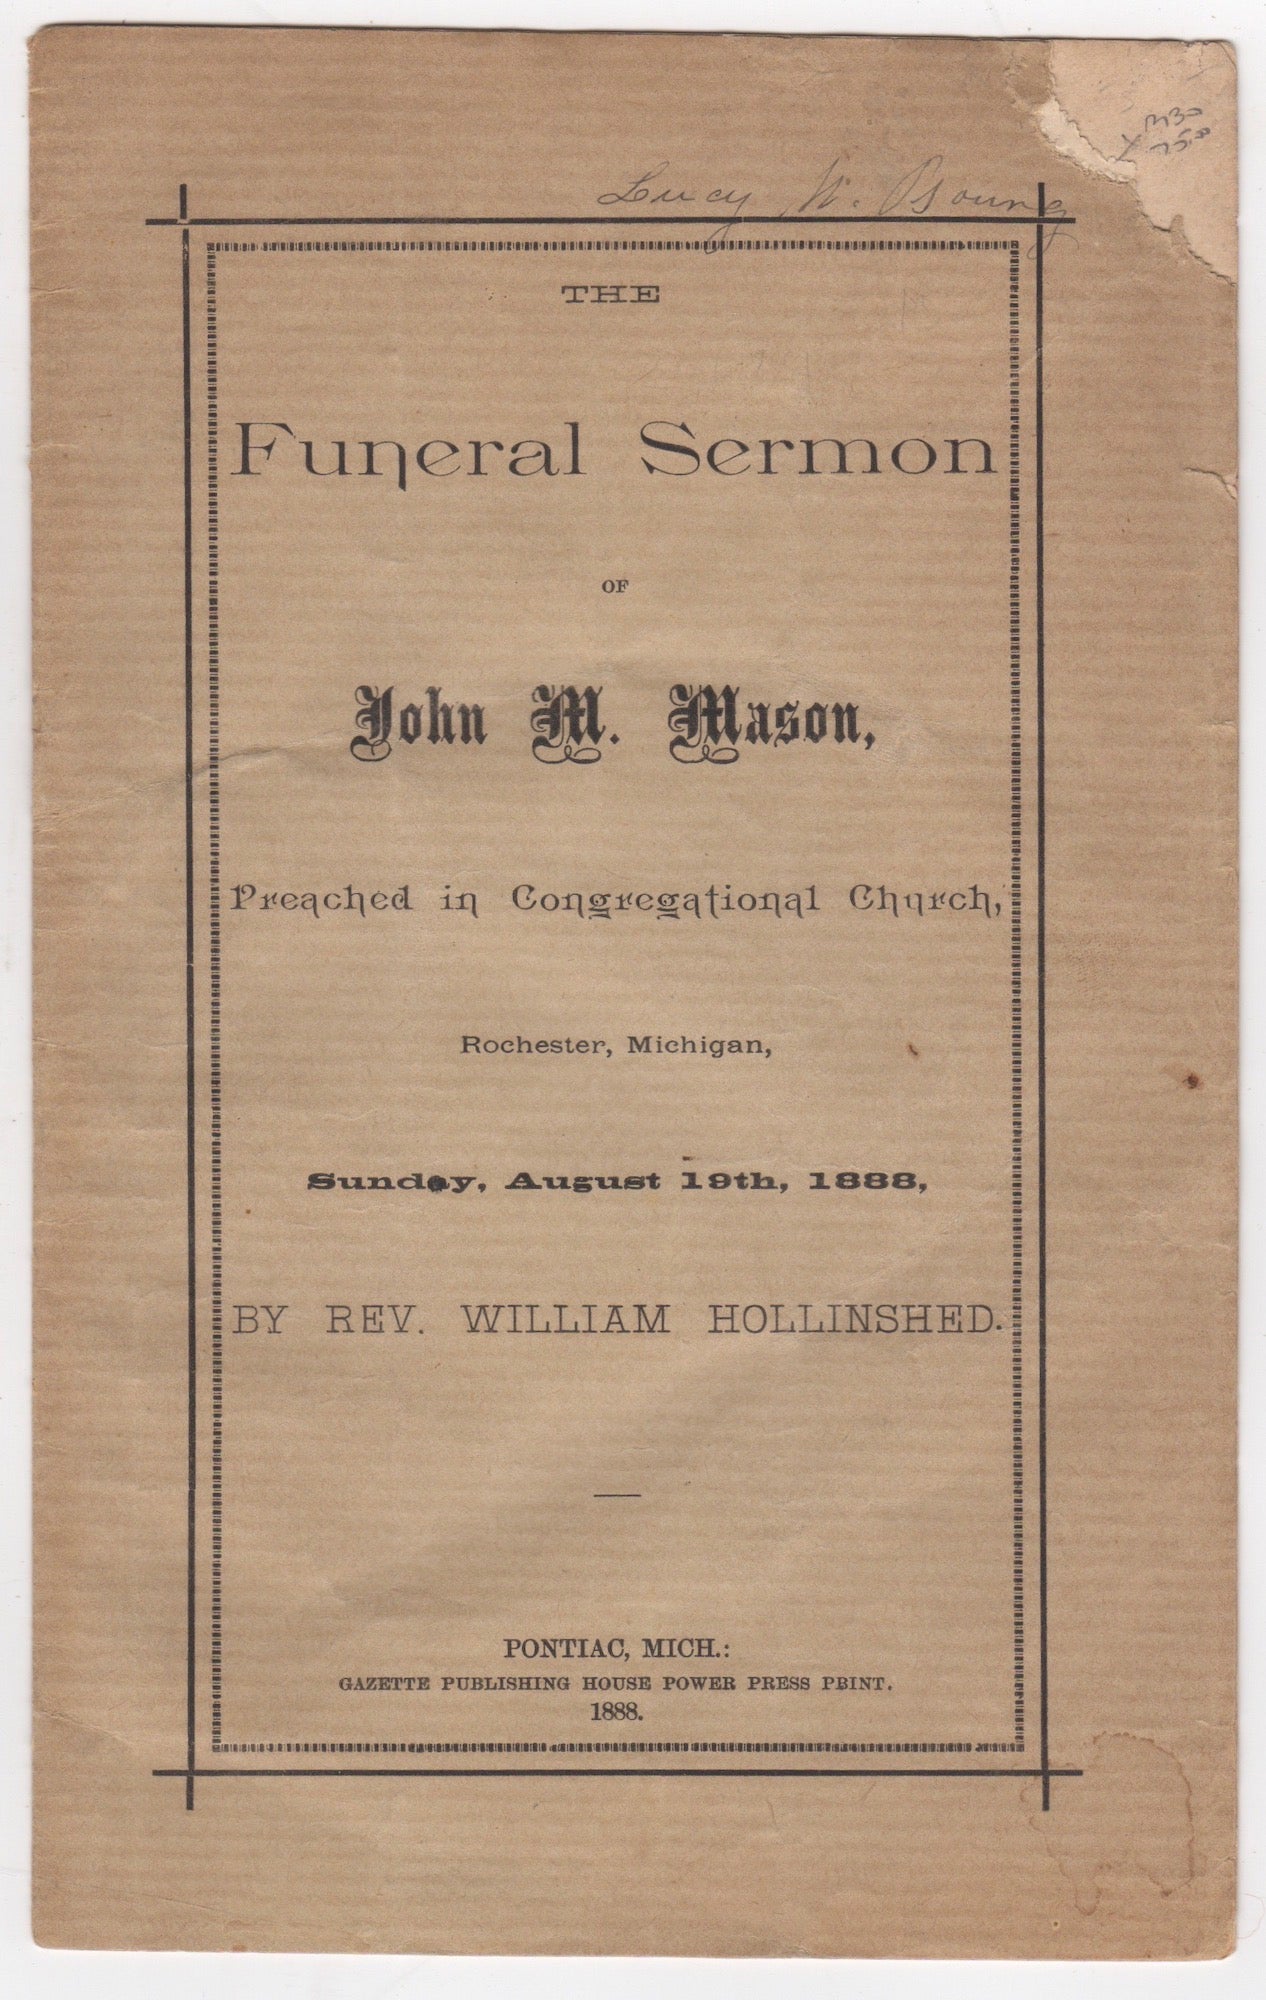 Hollinshed, William - The Funeral Sermon of John M. Mason, Preached in the Congregational Church, Rochester, Michigan, Sunday, August 19th, 1888